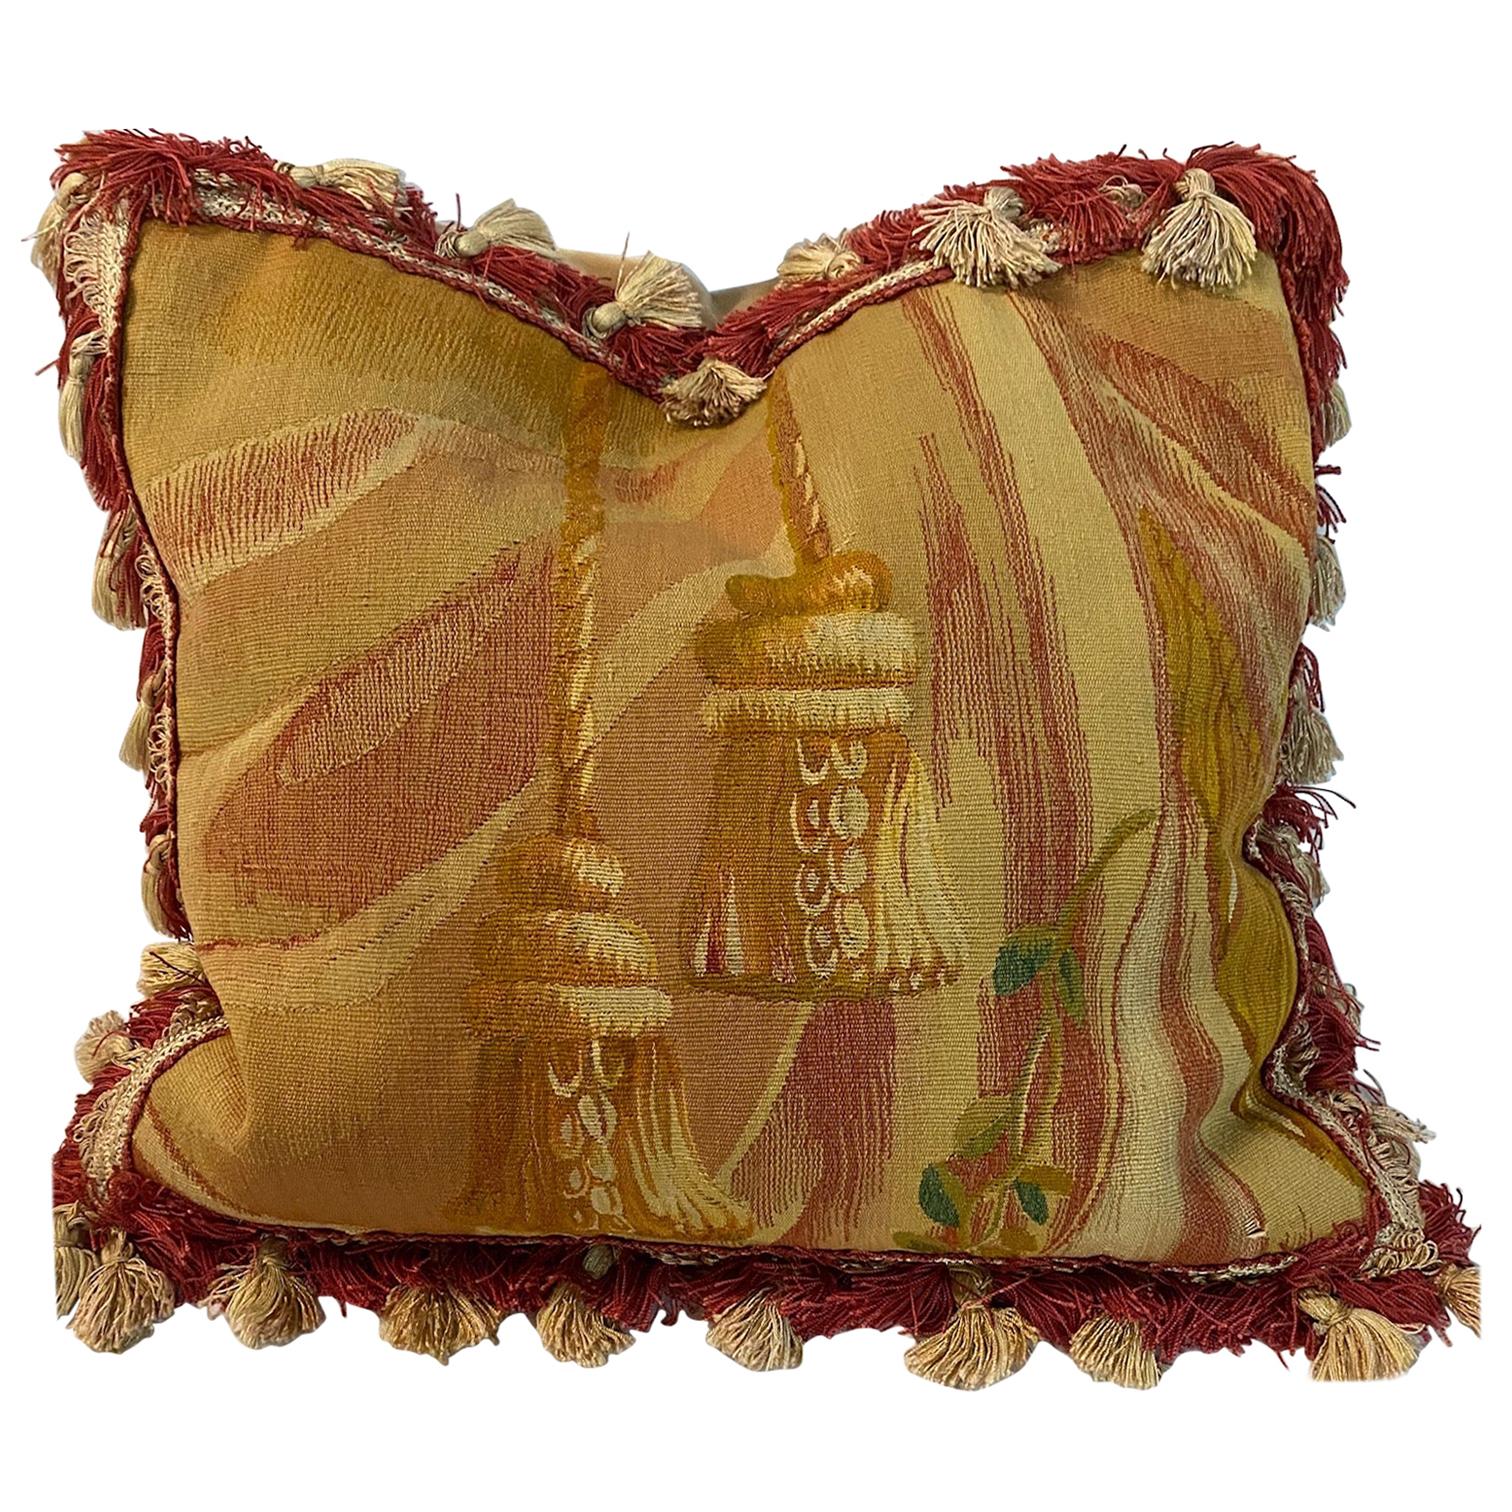 Aubusson Cushions - 32 For Sale on 1stDibs | aubusson pillows, french  aubusson pillows, antique aubusson pillows for sale